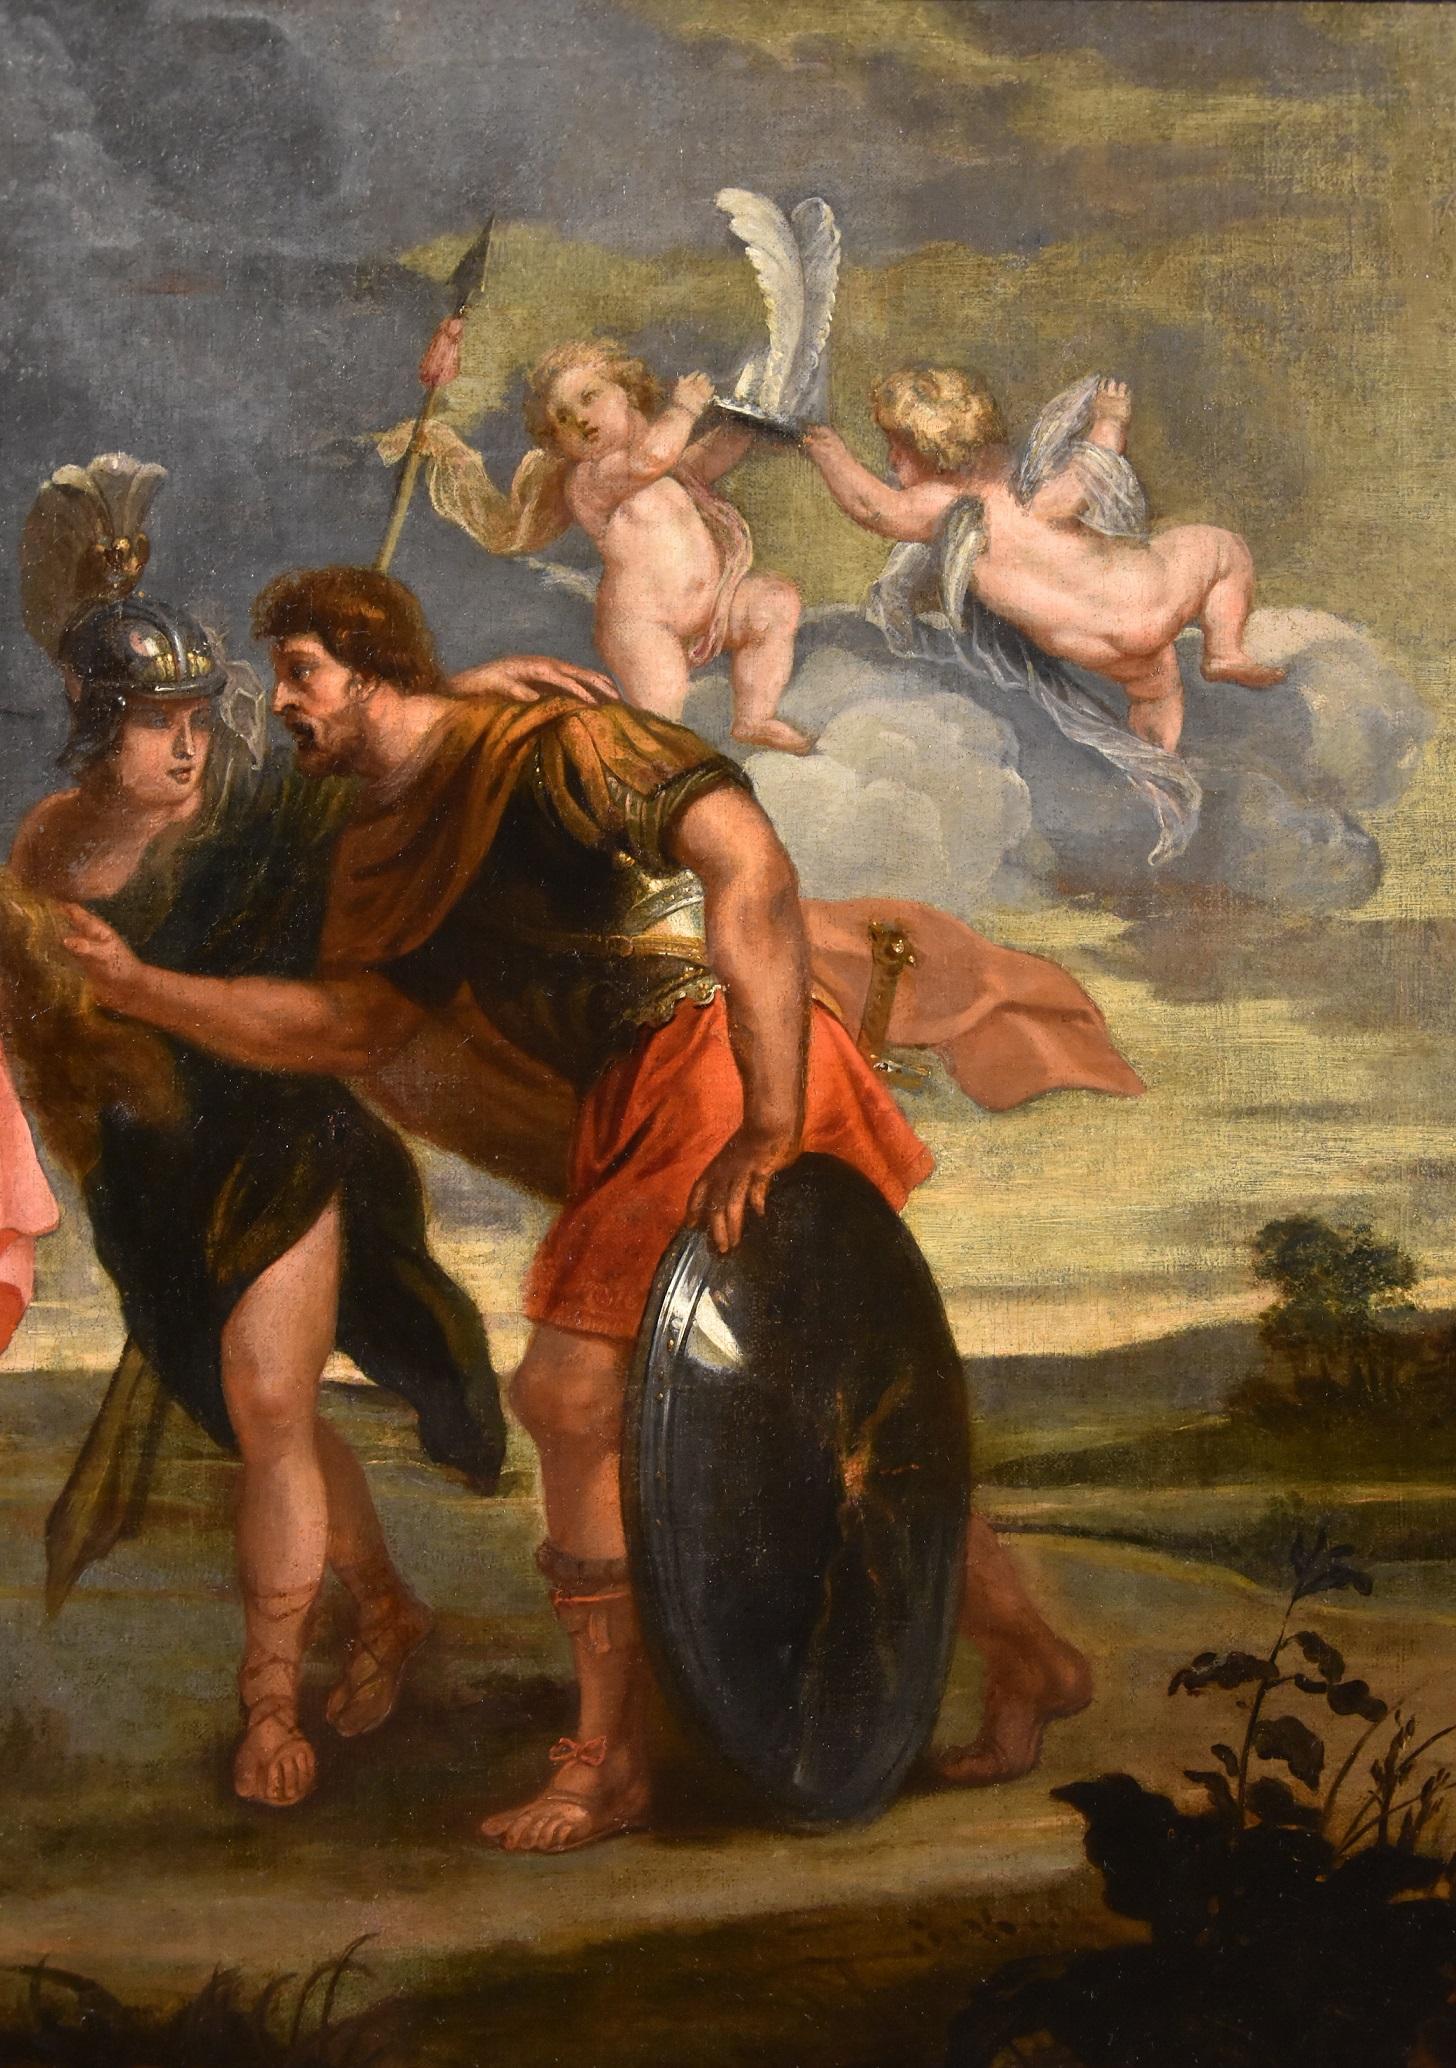 Flemish school of the first half of the 17th century
Theodoor van Thulden (Bois-Le-Duc, 1606 - 1669), attributable
Aeneas receives the weapons given to him by Venus

About 1640.
oil painting on canvas
h.75 x 72 cm. - in frame h.92 x 80 cm.

The